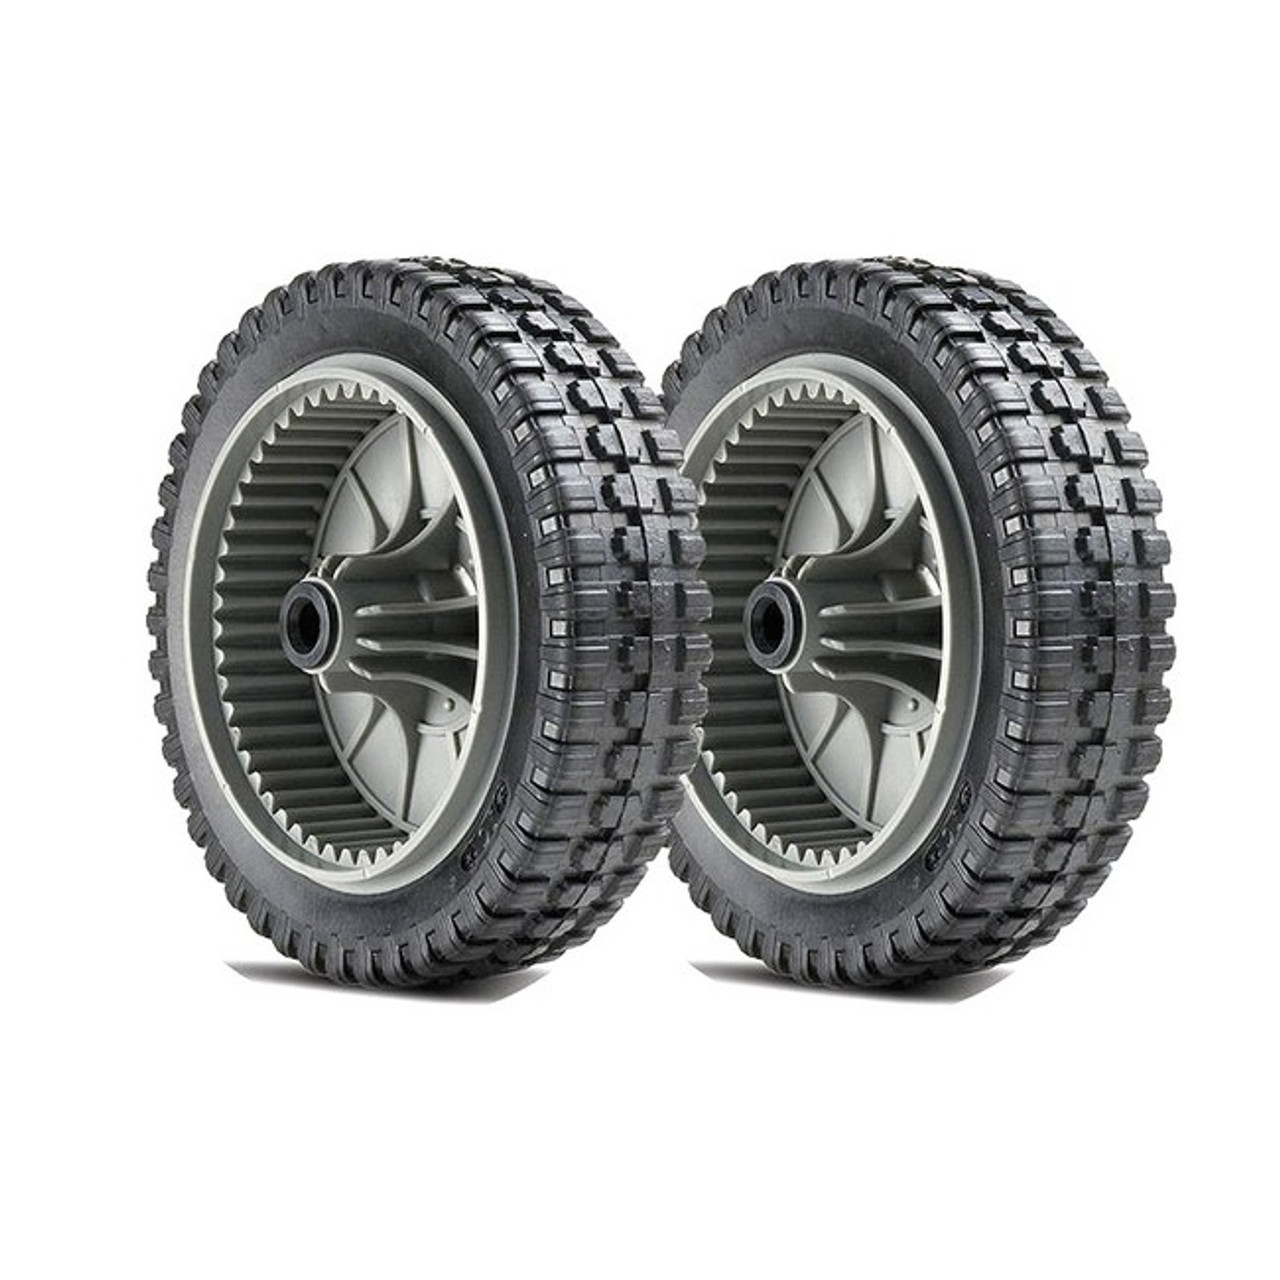 Self Propelled Drive Wheels for Murray Scotts lawn mower 672441, 672441MA, Set of 2 tires